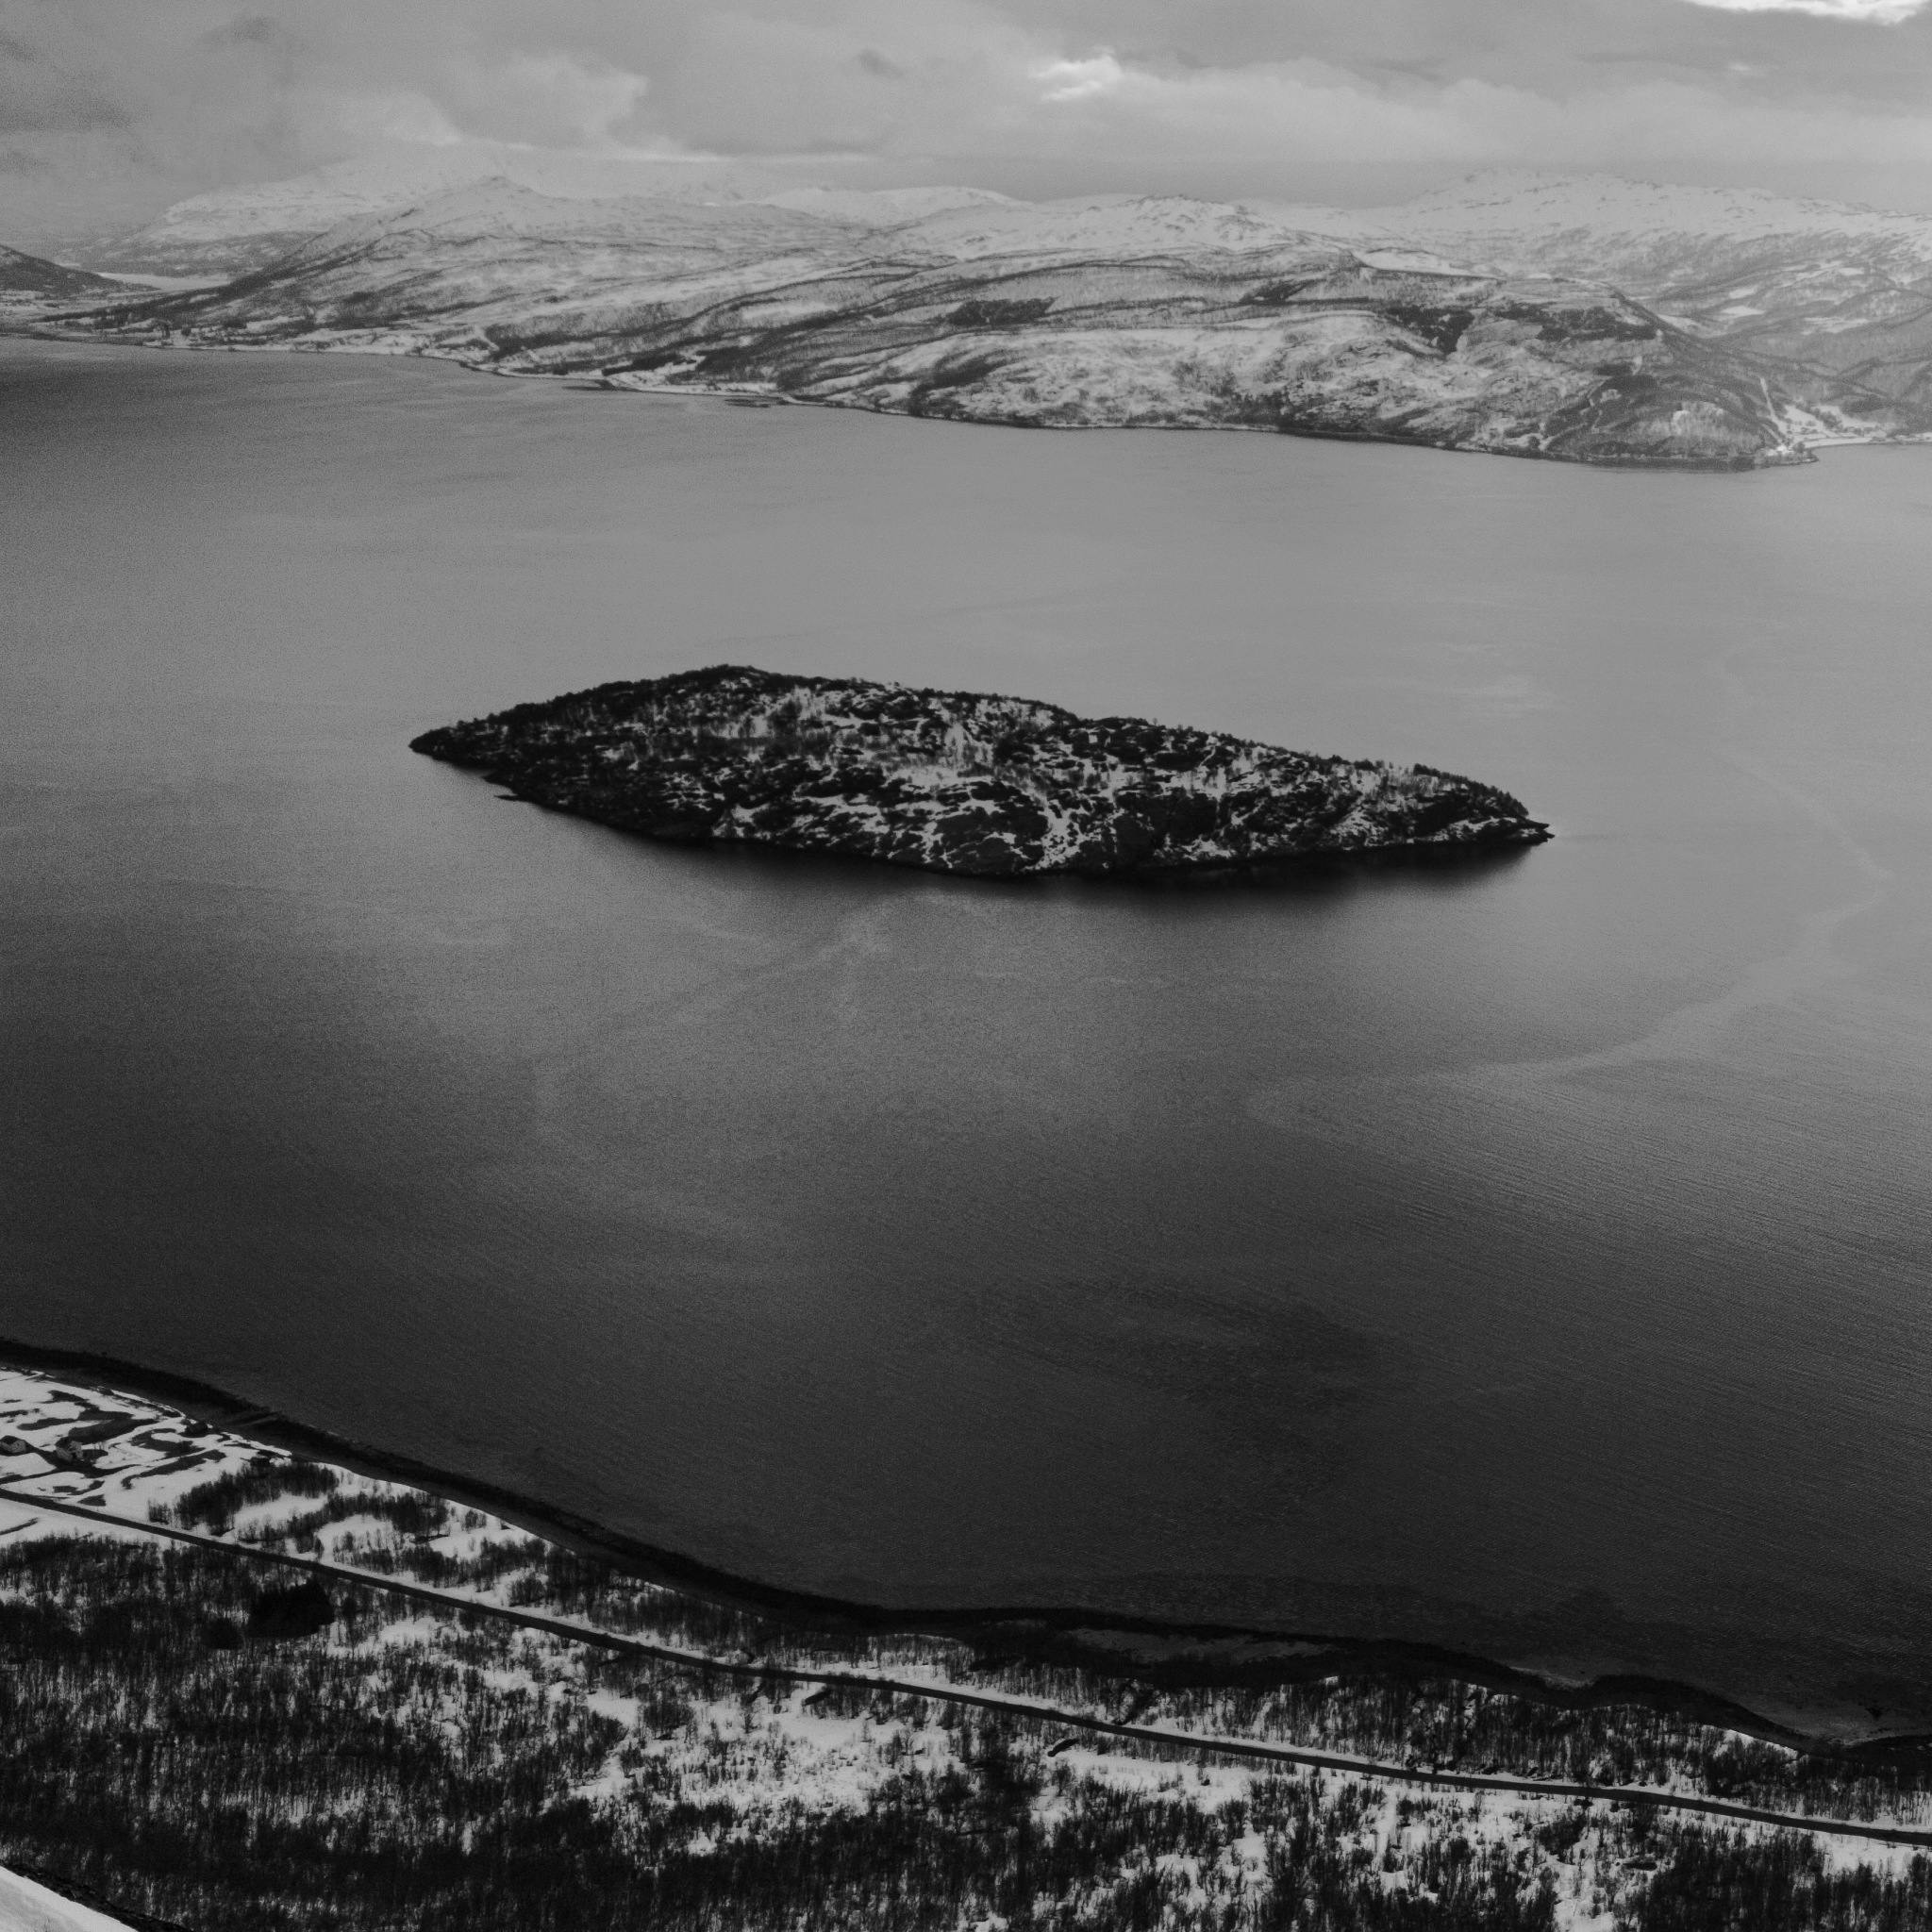 A black and white photo of an island in a fjord